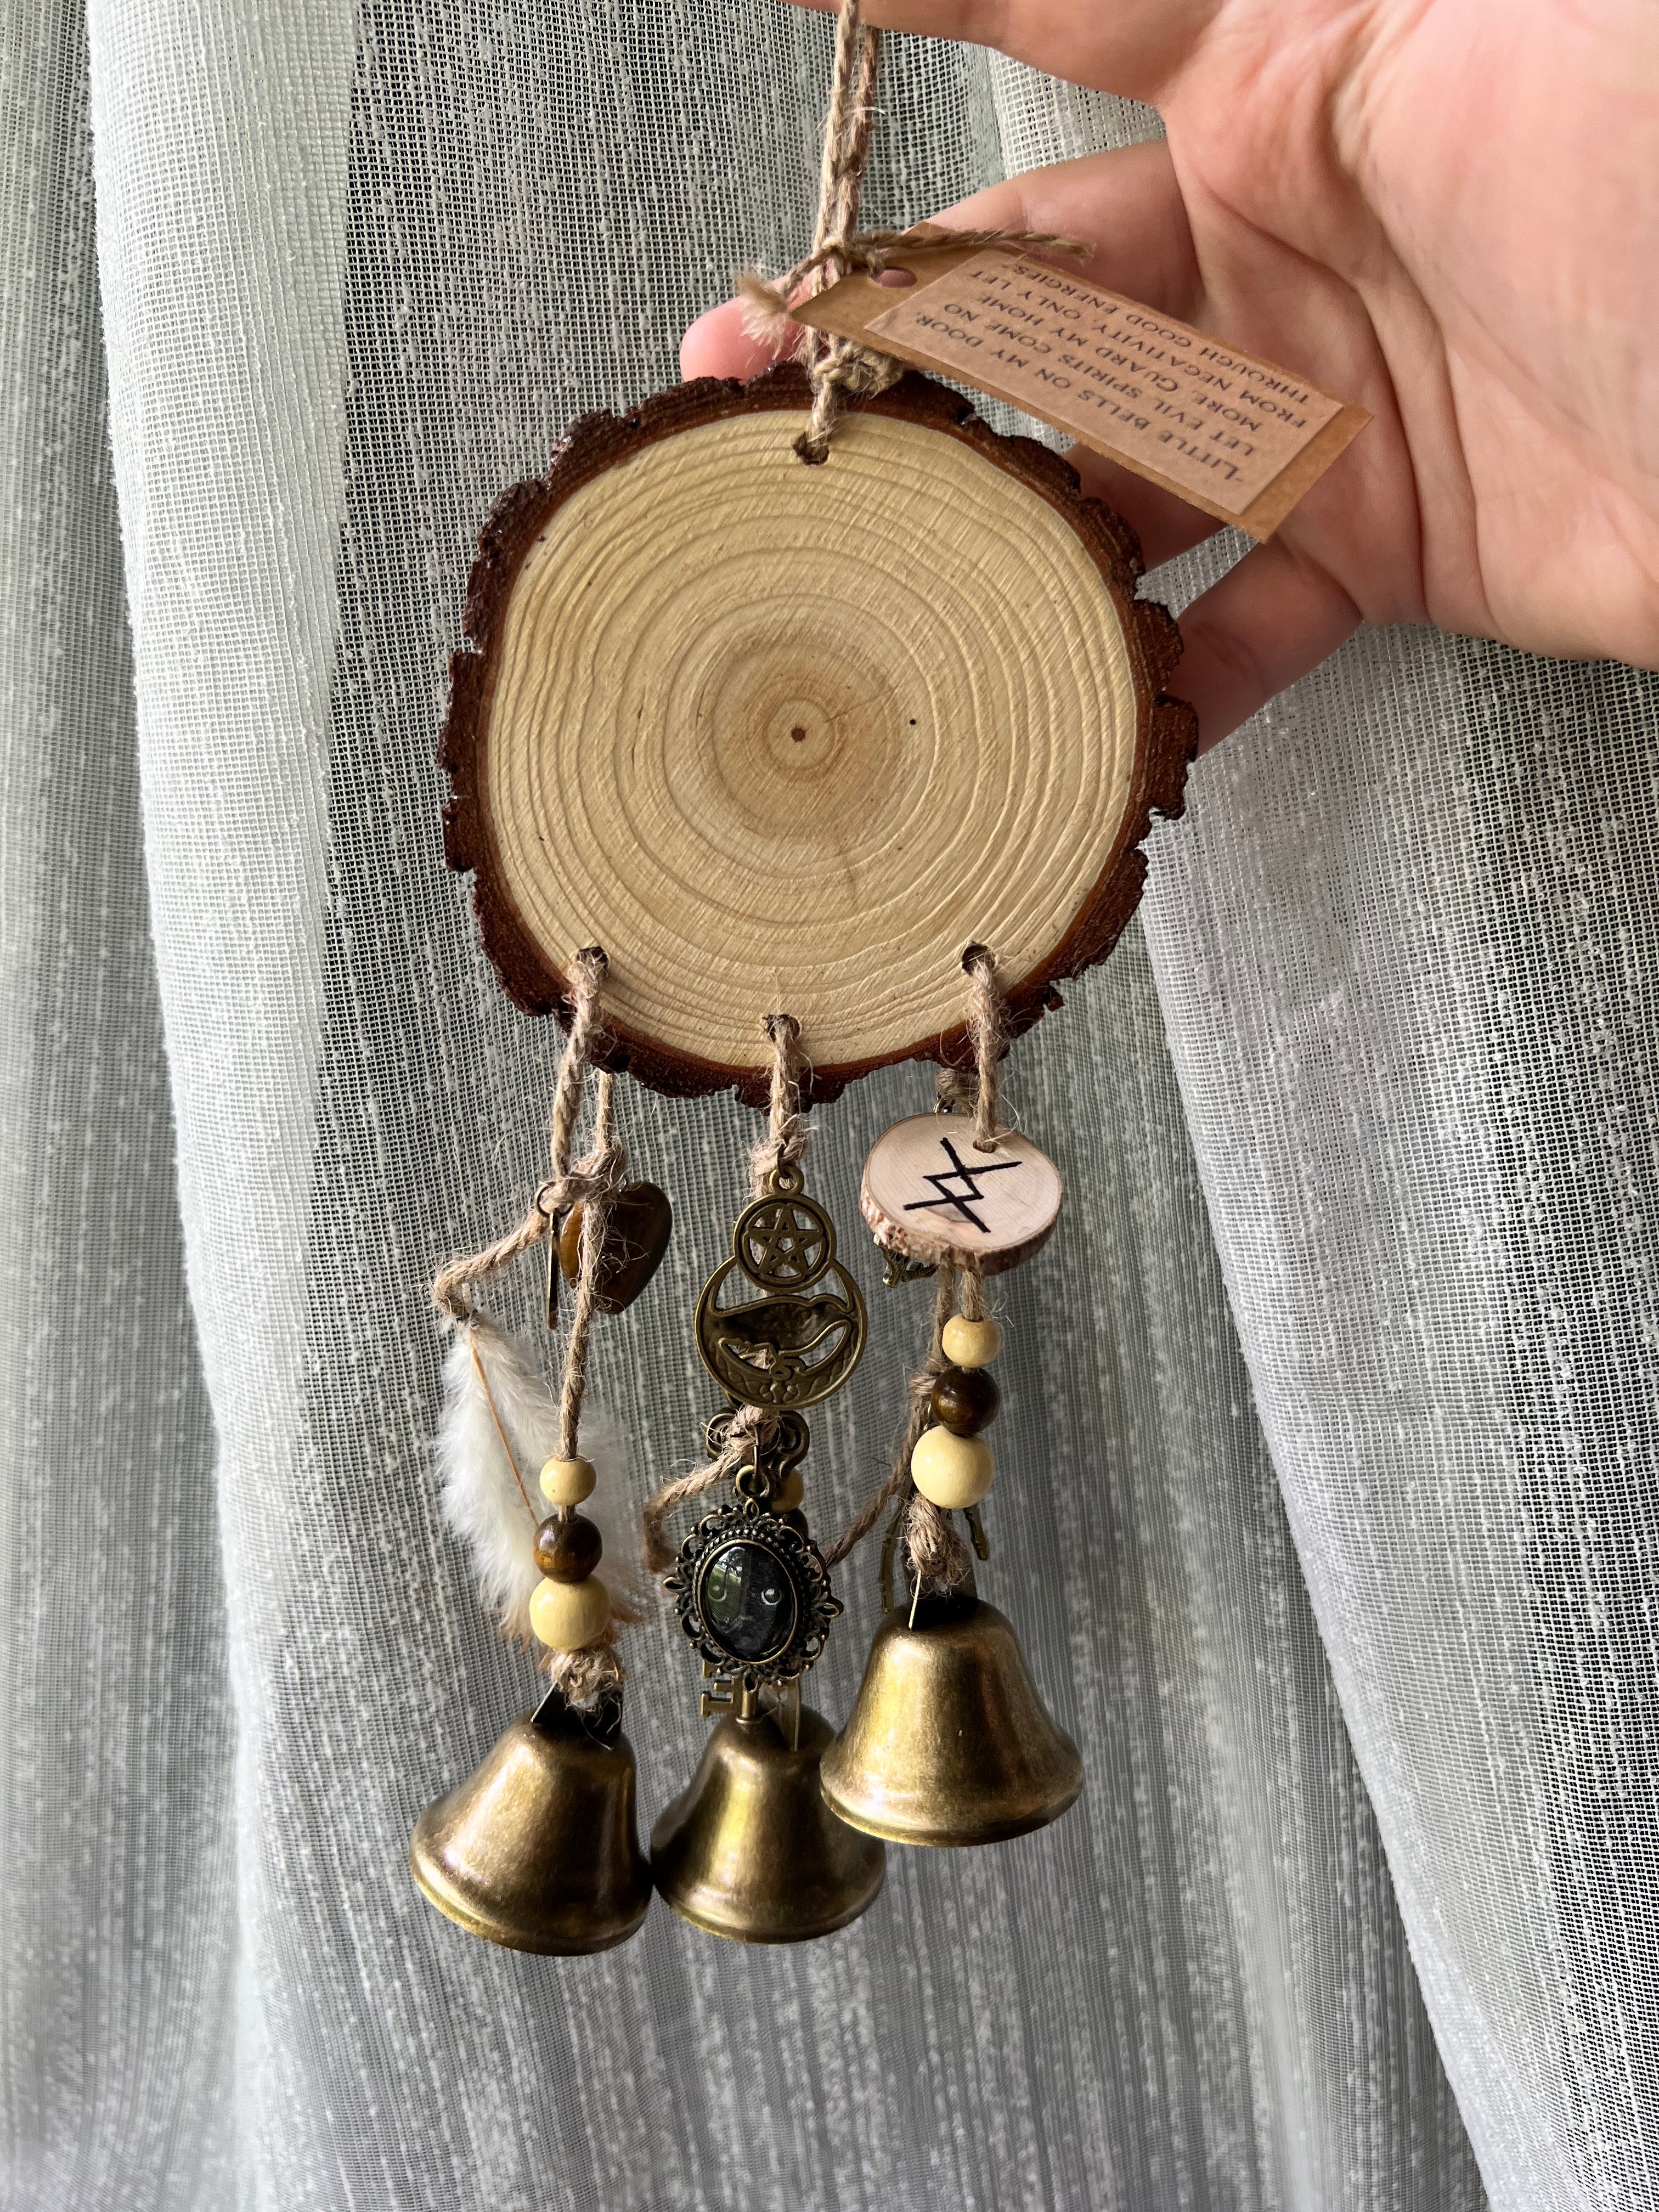 Handmade Witches Bells- Witch House